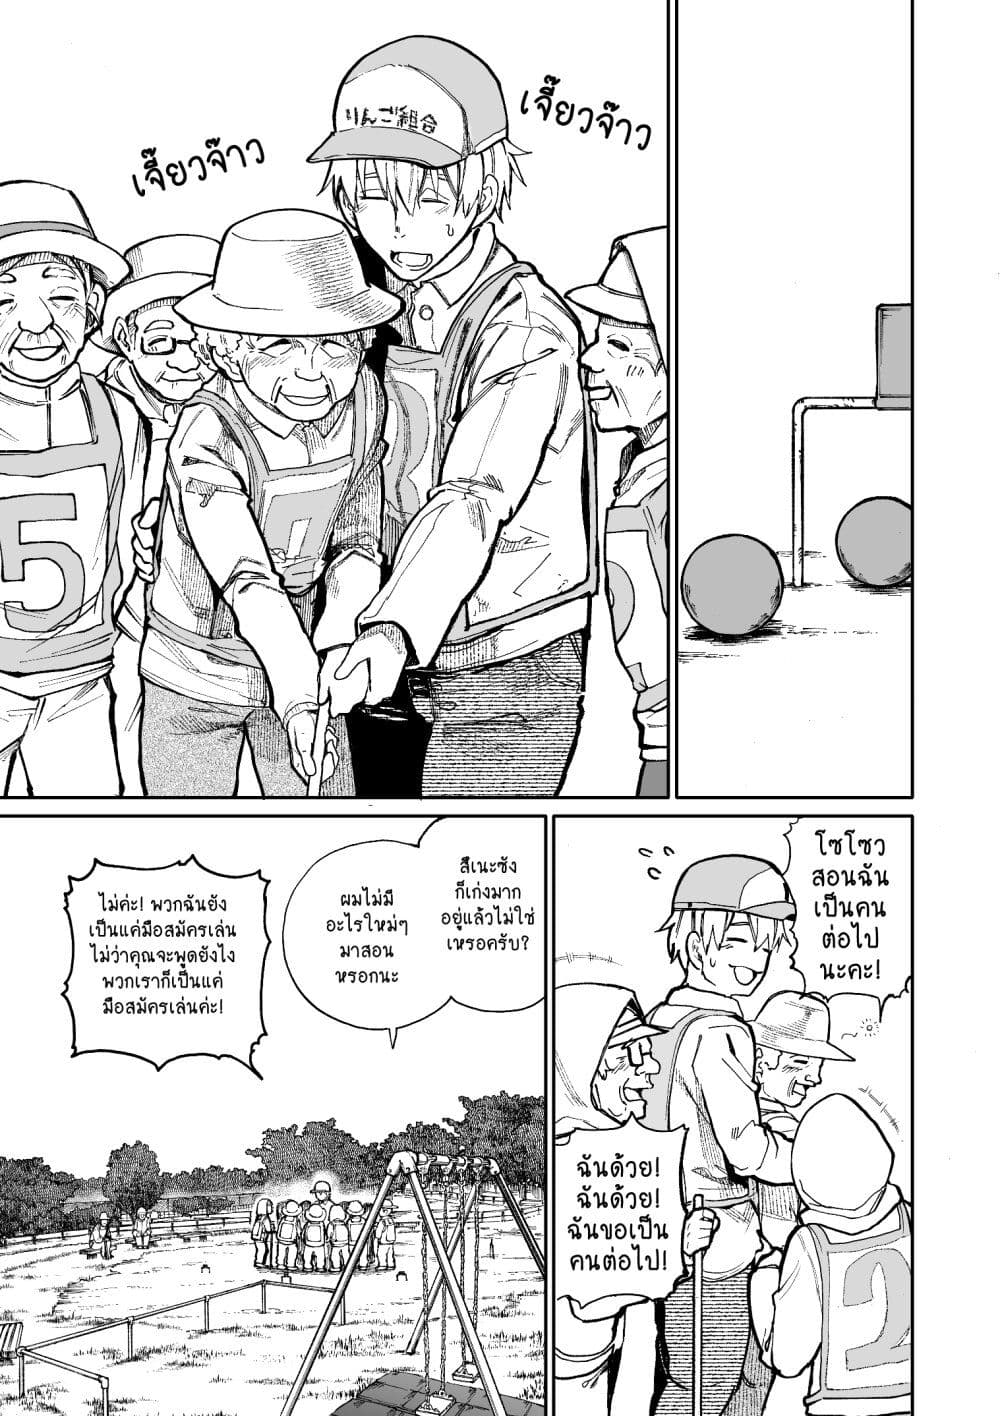 A Story About A Grampa and Granma Returned Back to their Youth คู่รักวัยดึกหวนคืนวัยหวาน 71-71